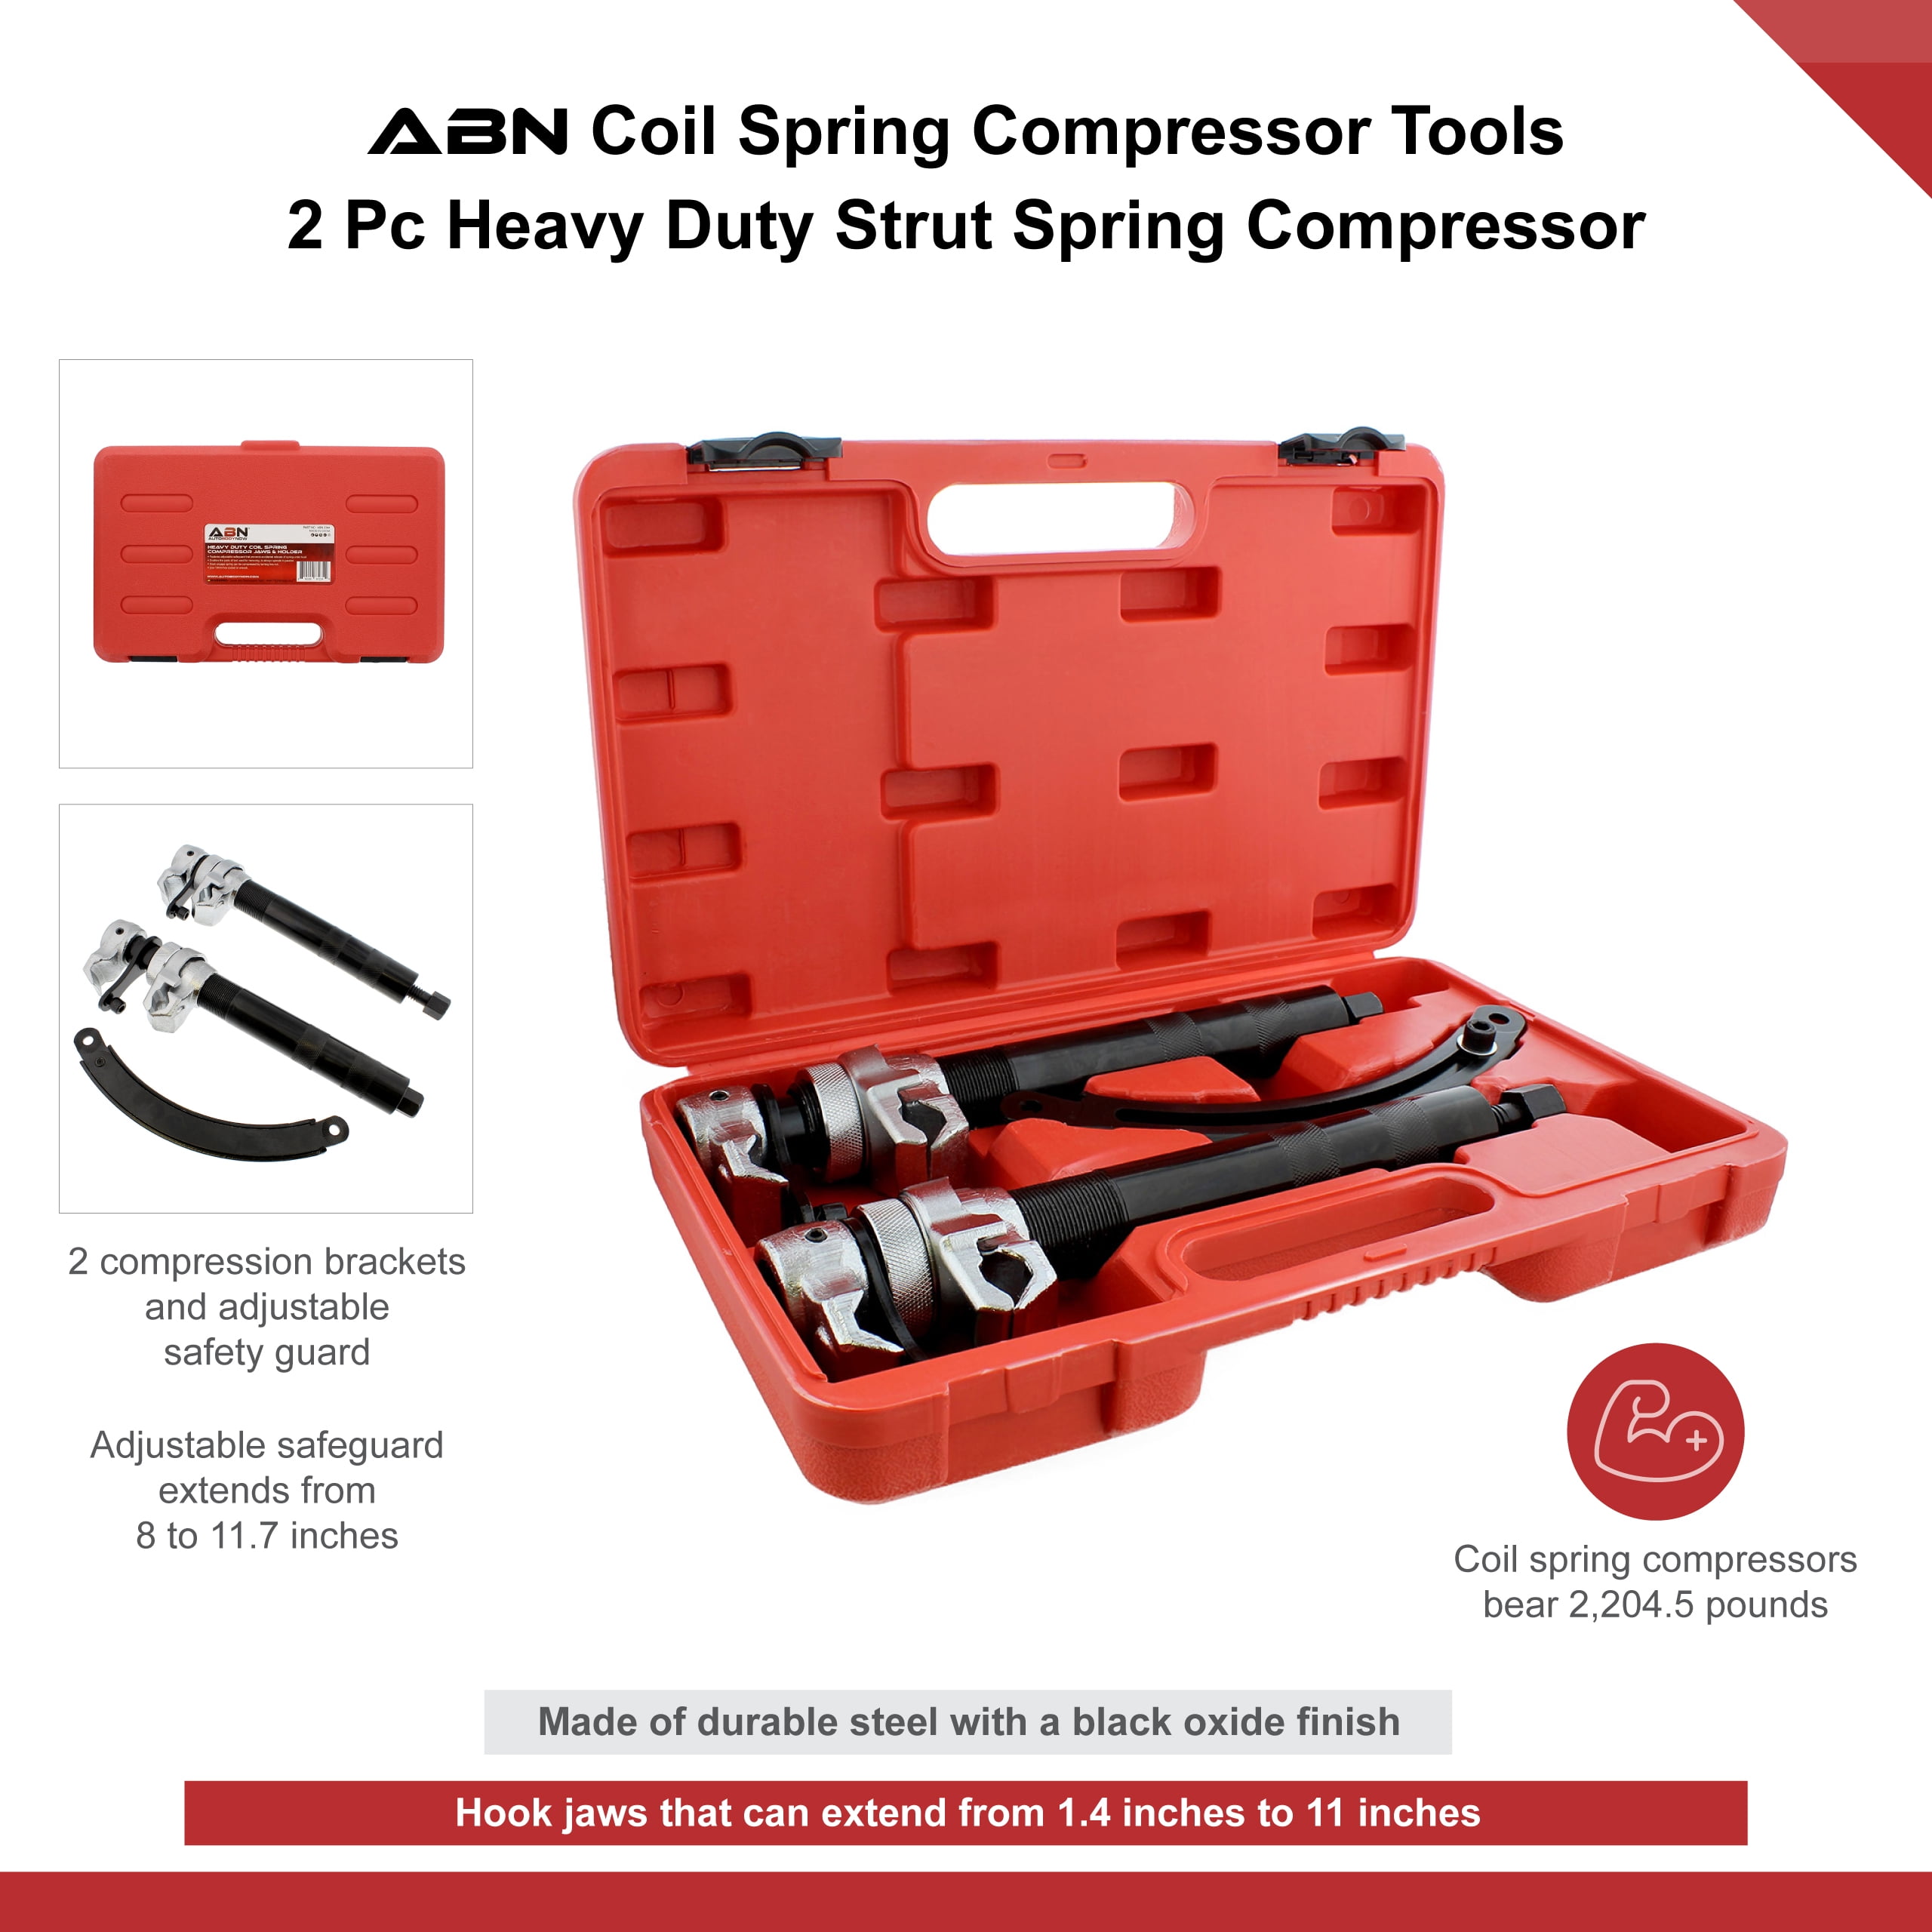 ABN Coil Spring Compression Tools - 2pc Coil Spring Clamps with